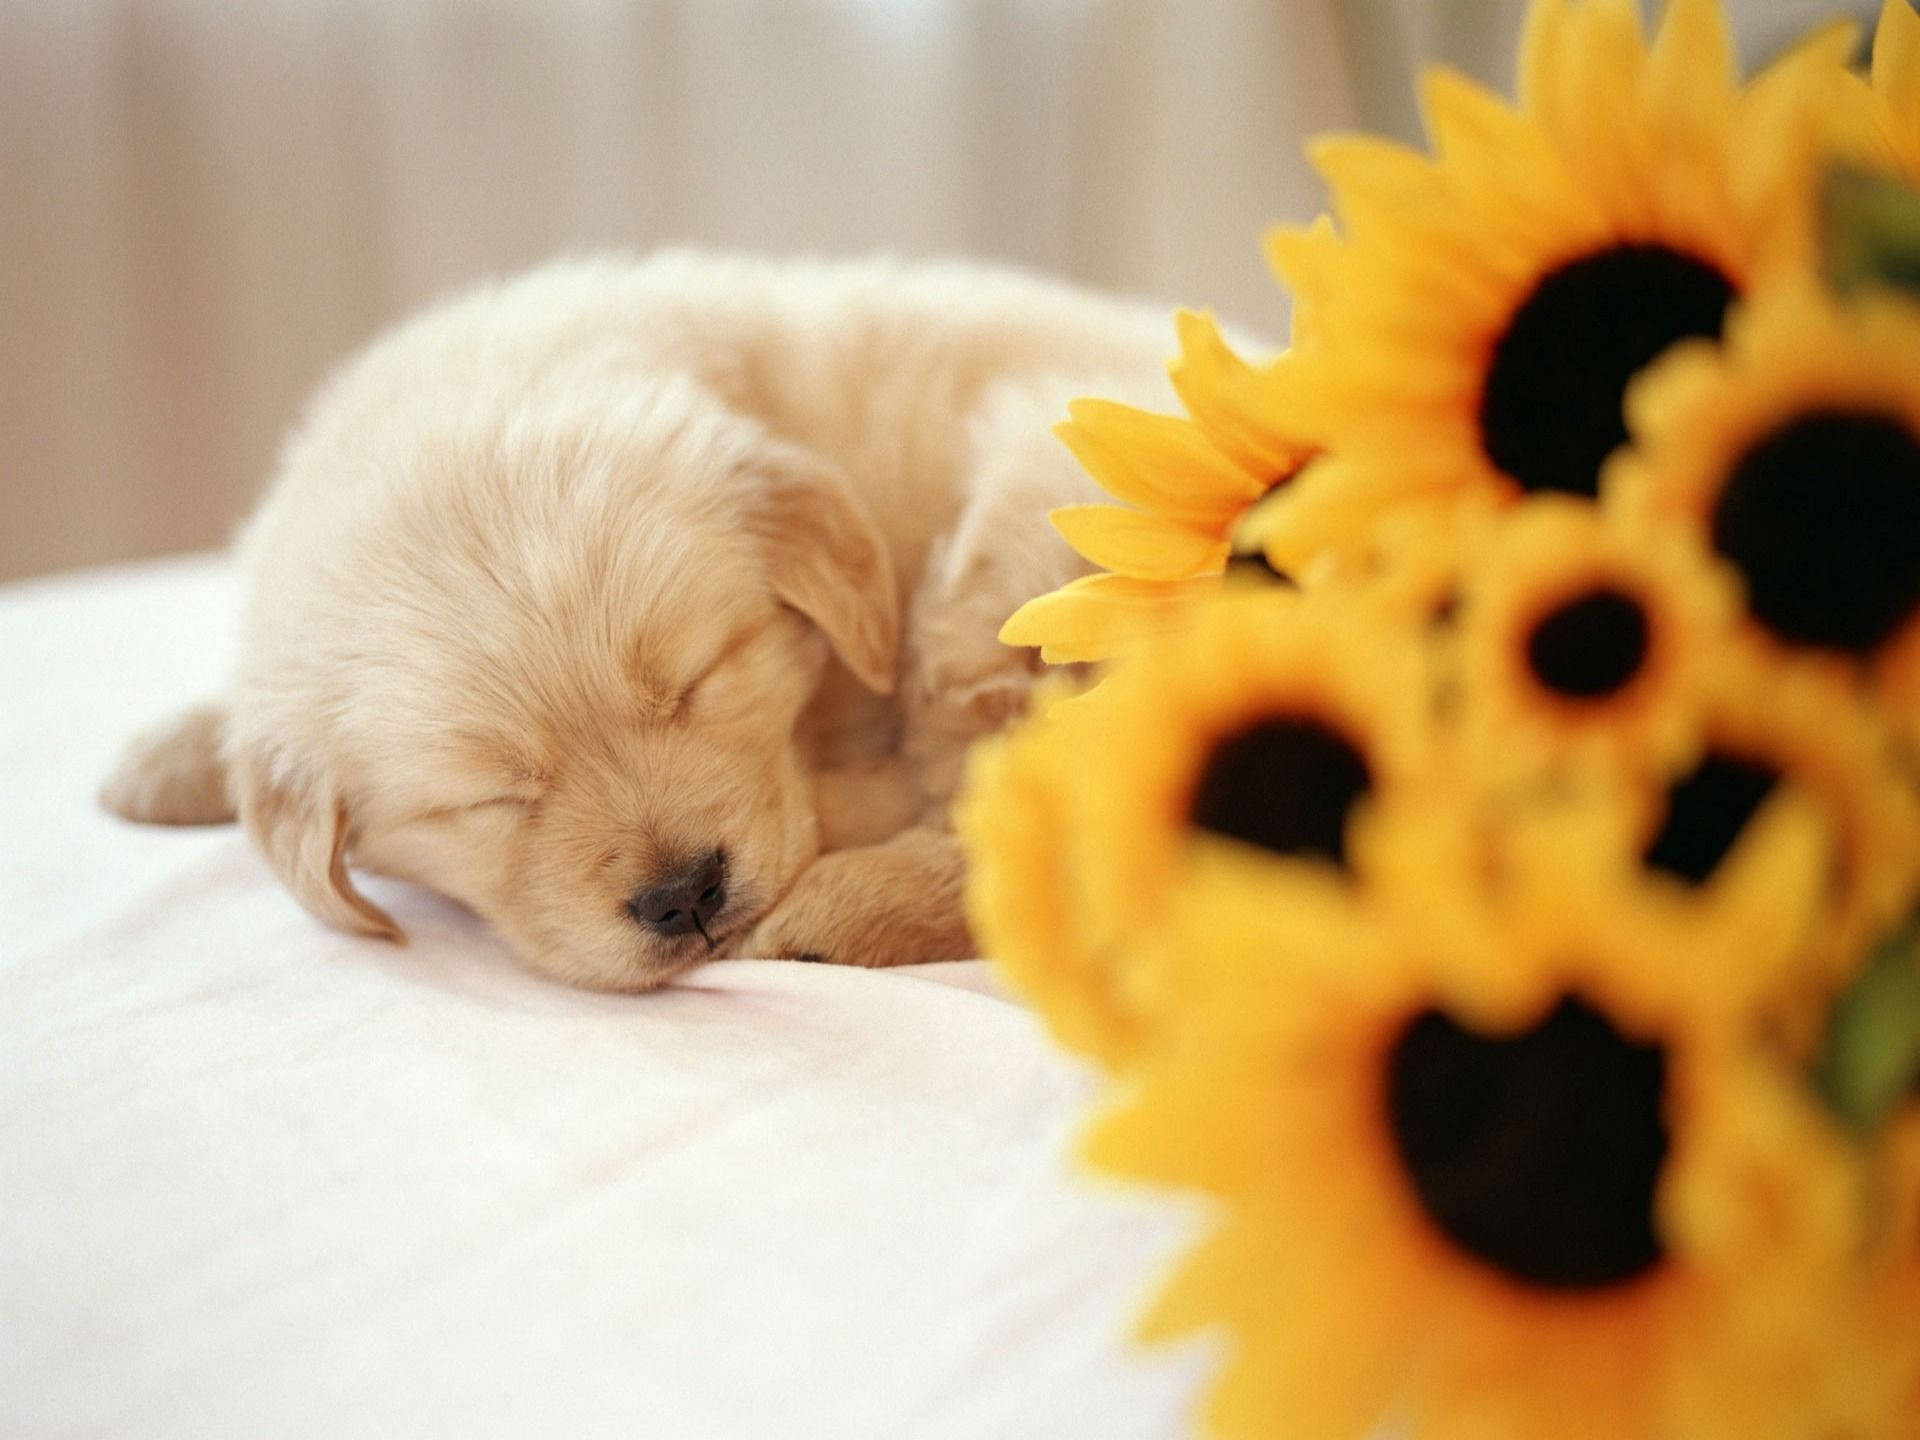 Sleeping Puppy And Sunflowers Wallpaper